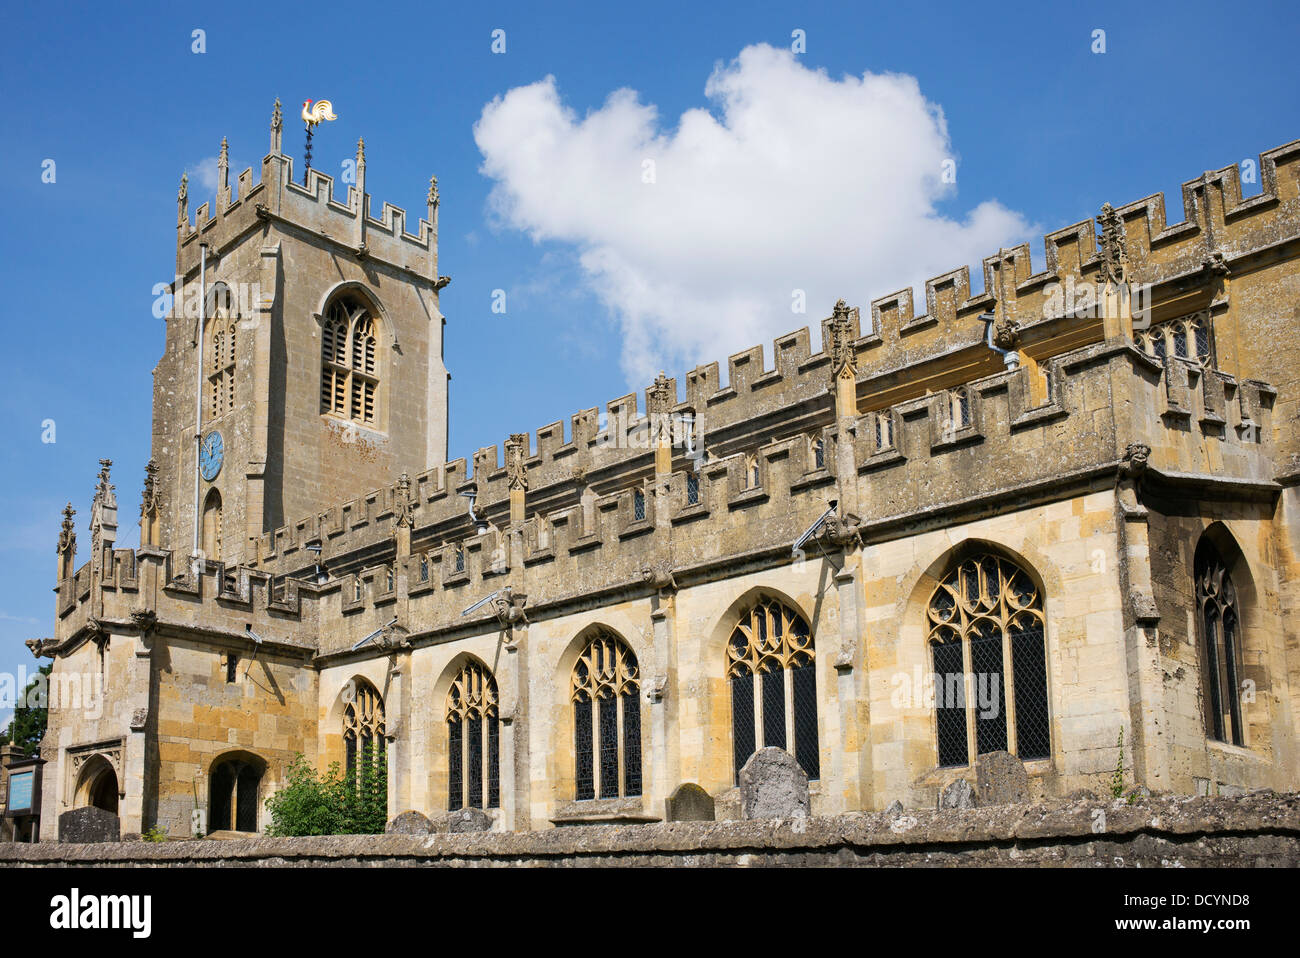 St Peters church, Winchcombe. Gloucestershire, England Stock Photo